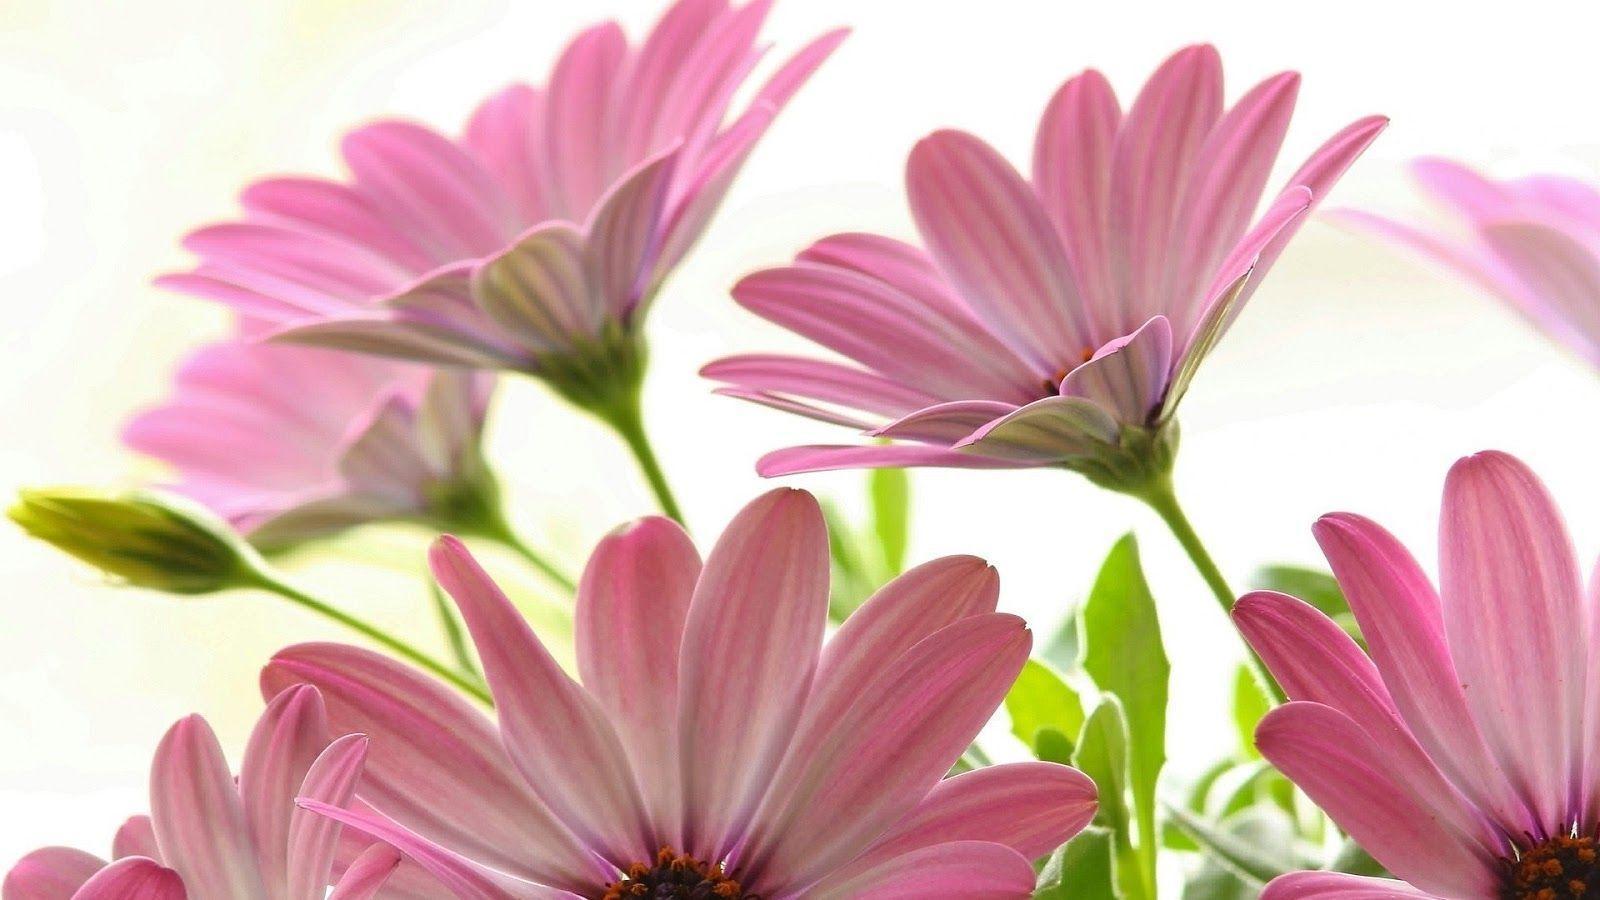 Pink Daisy Wallpapers - Wallpaper Cave